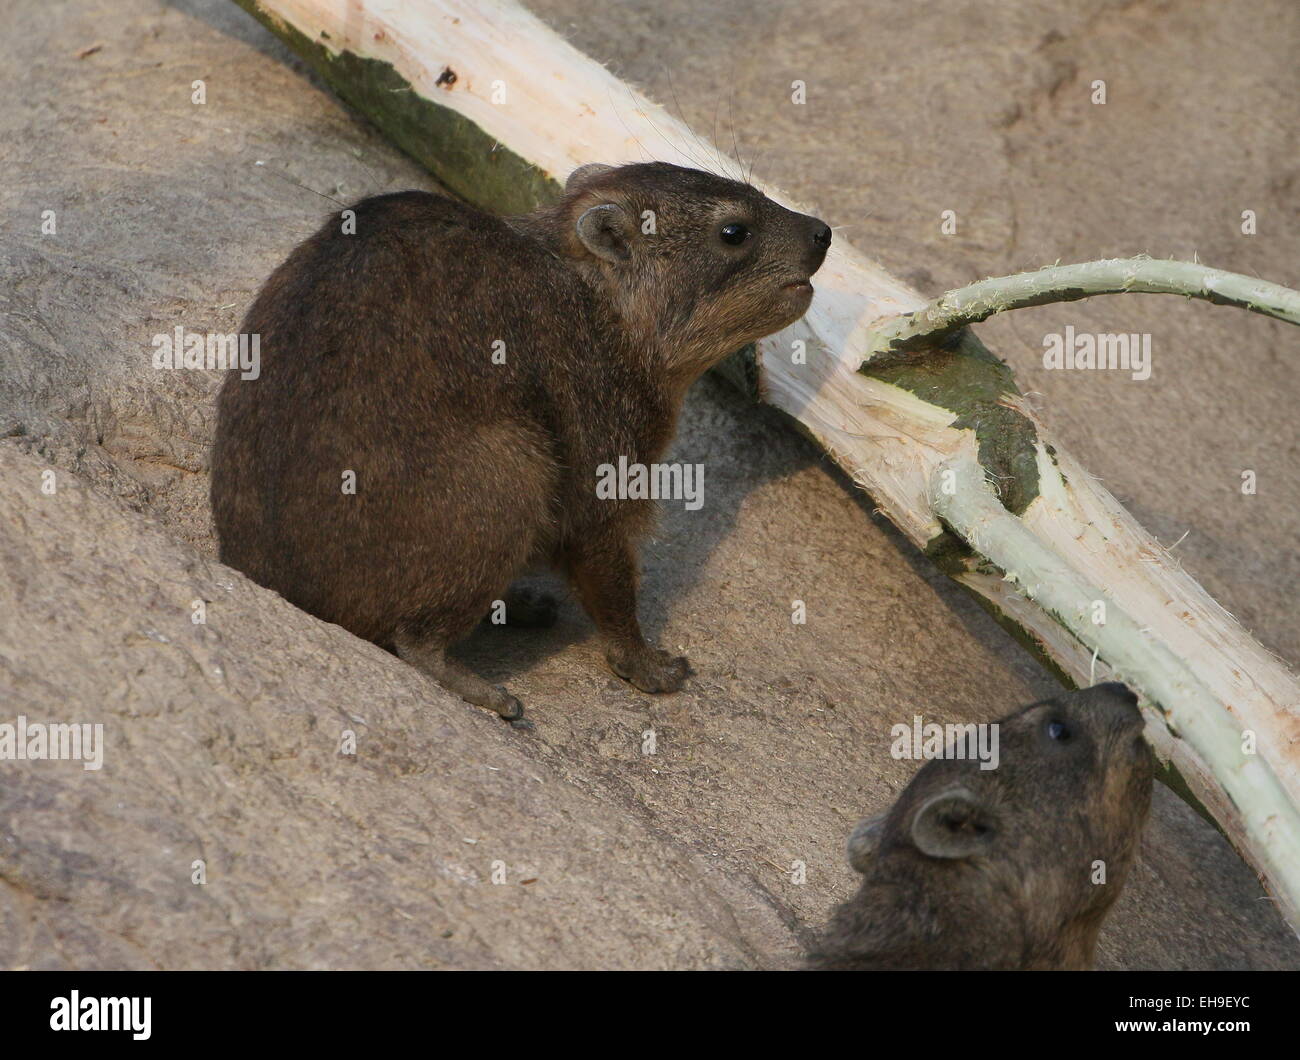 Two South African Cape or rock hyraxes (Procavia capensis), a.k.a. Rock badger or 'Dassie' Stock Photo